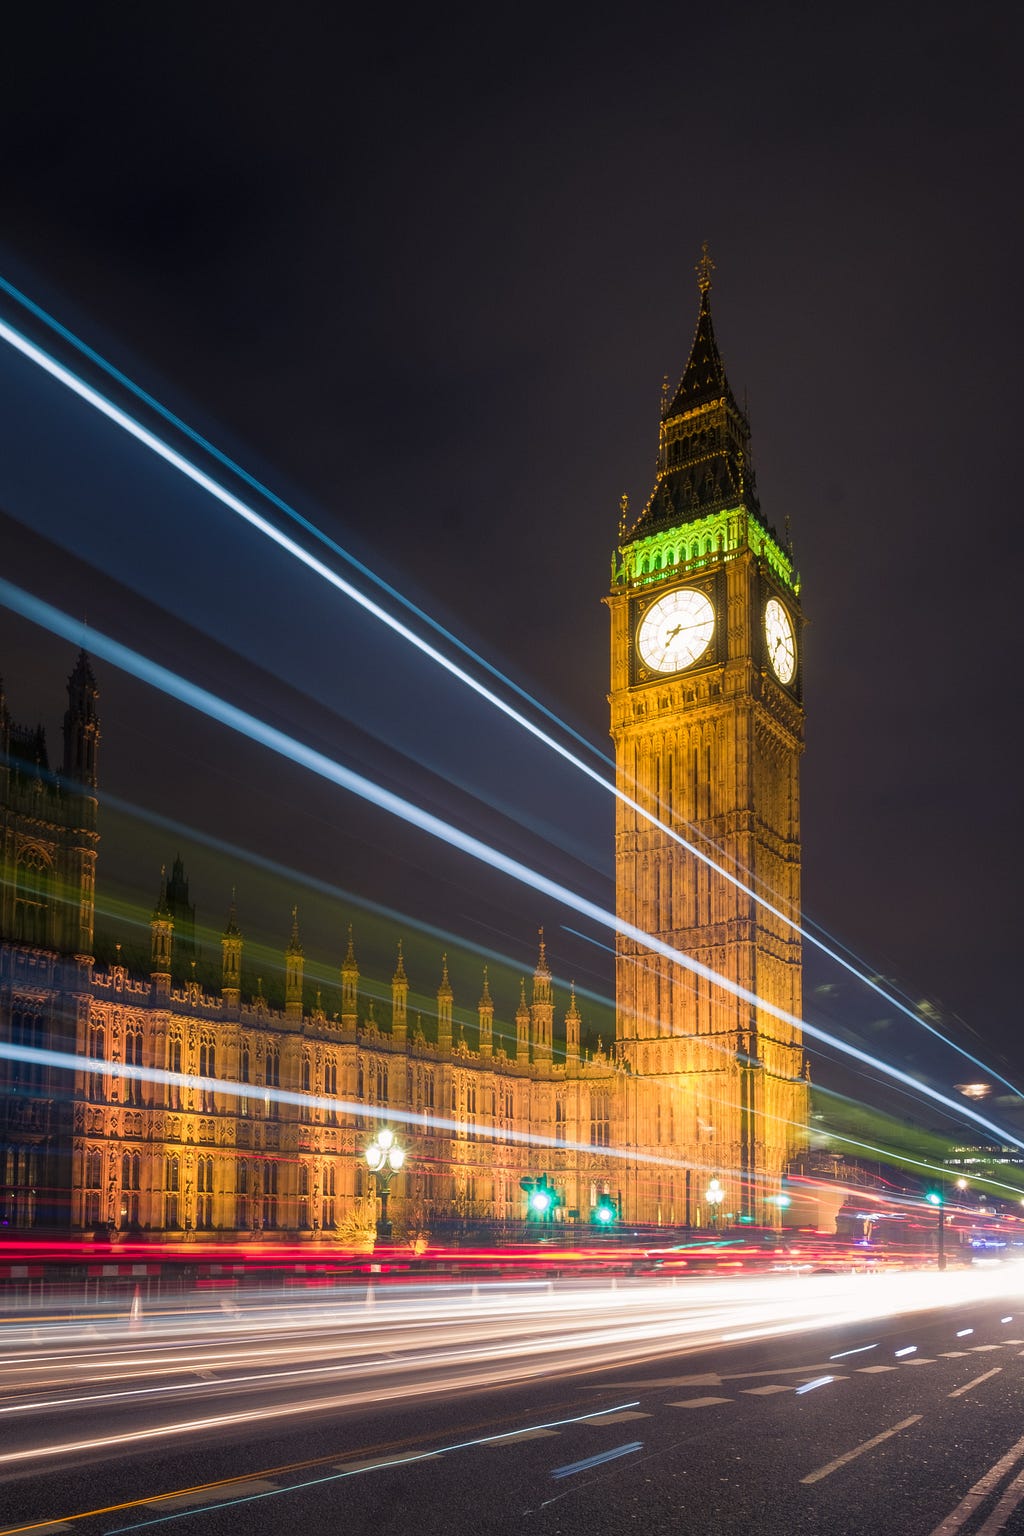 A stylized long exposure photo of the tower and clock Big Ben at night, with streaks of light suggesting movement. Photo by Christian Holzinger on Unsplash.